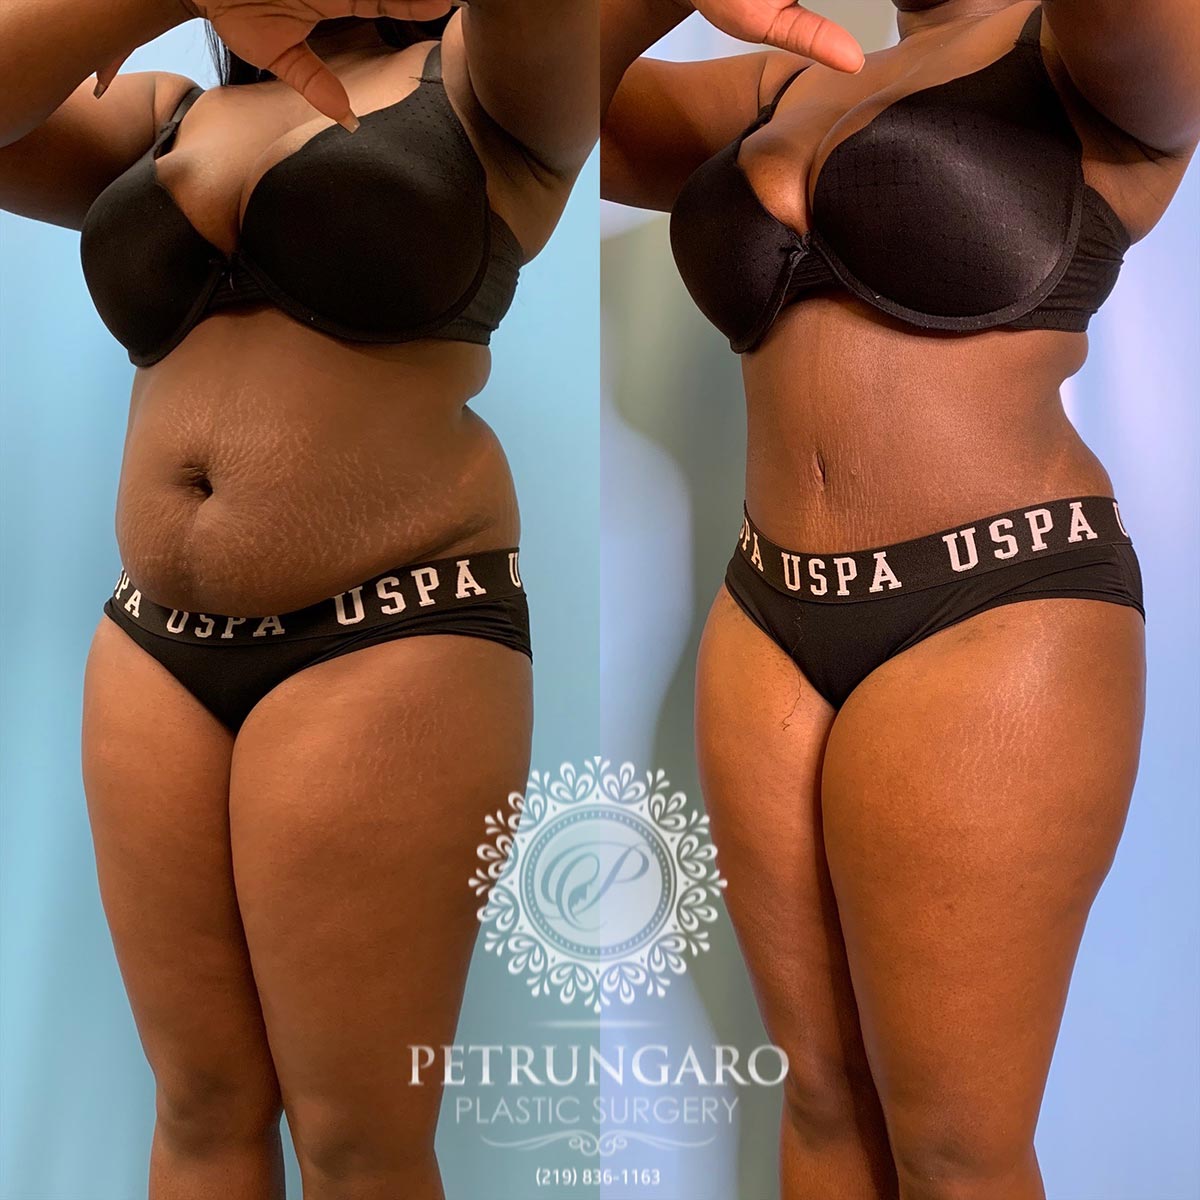 30 year old woman 3 months after tummy tuck with Lipo 360-5